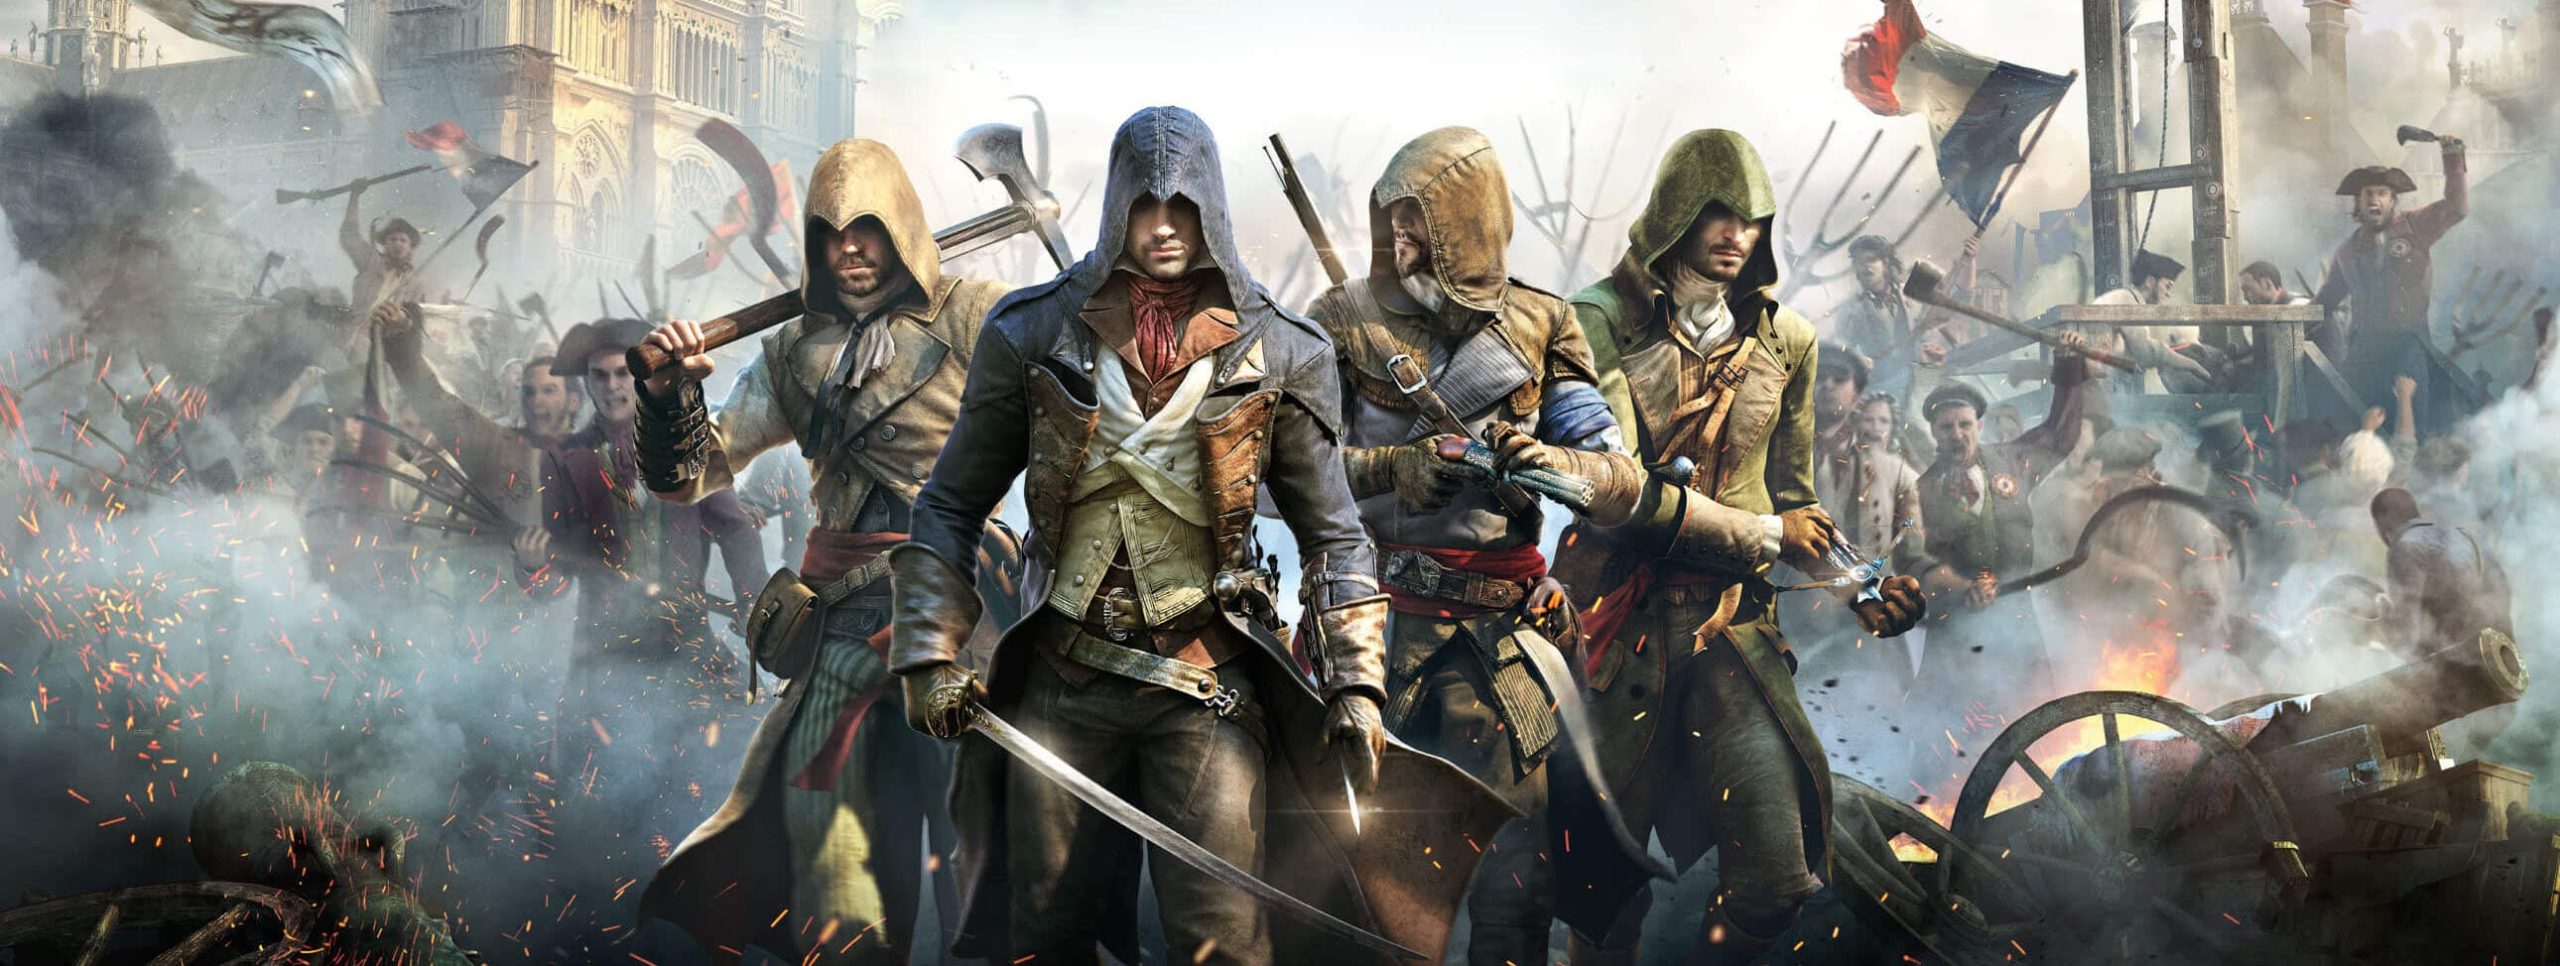 assassin's creed shop banner